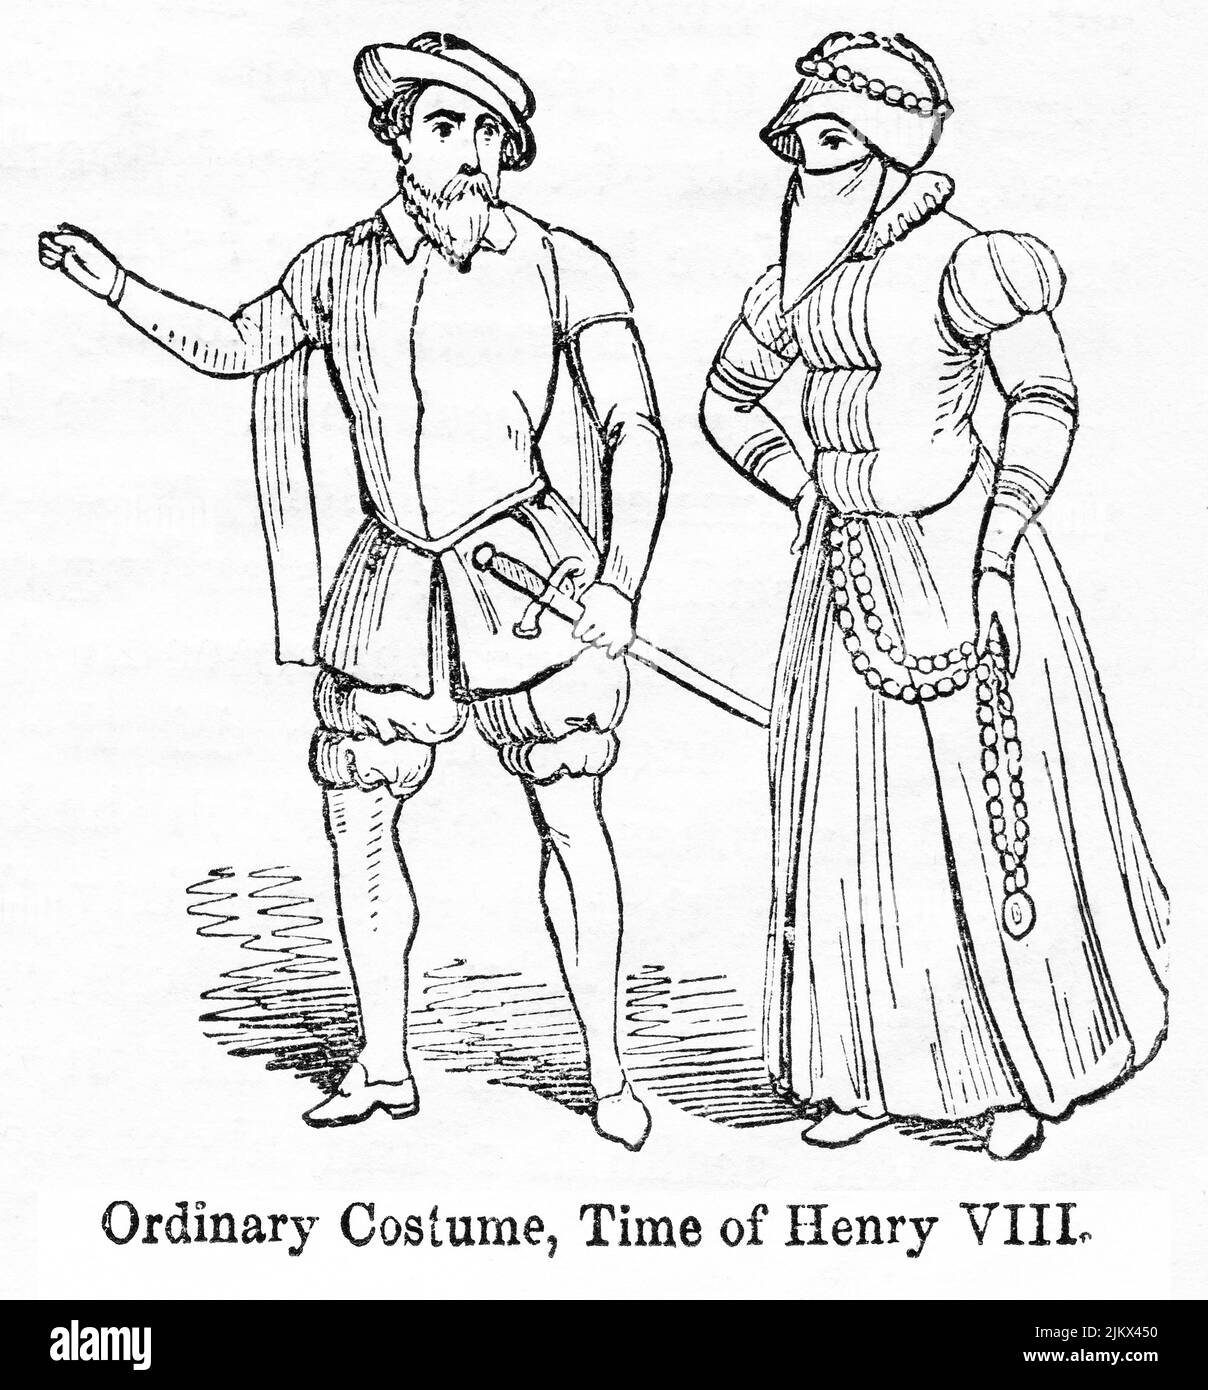 Ordinary Costume, Time of Henry VIII, Illustration from the Book, 'John Cassel’s Illustrated History of England, Volume II', text by William Howitt, Cassell, Petter, and Galpin, London, 1858 Stock Photo